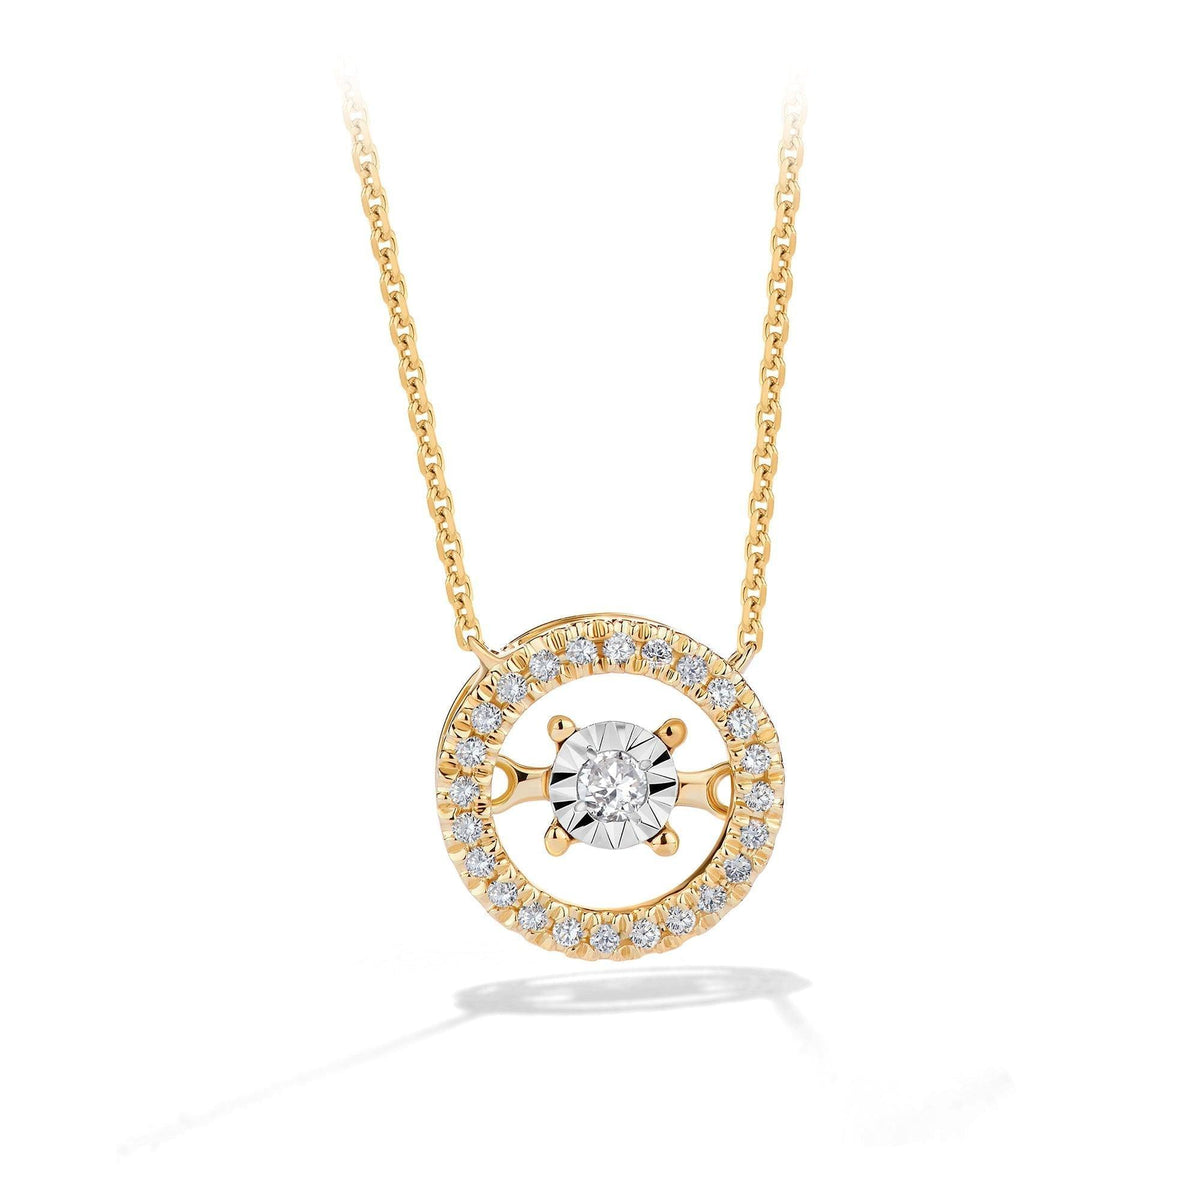 Dancing Diamond Halo Necklace in 9ct Yellow Gold - Wallace Bishop